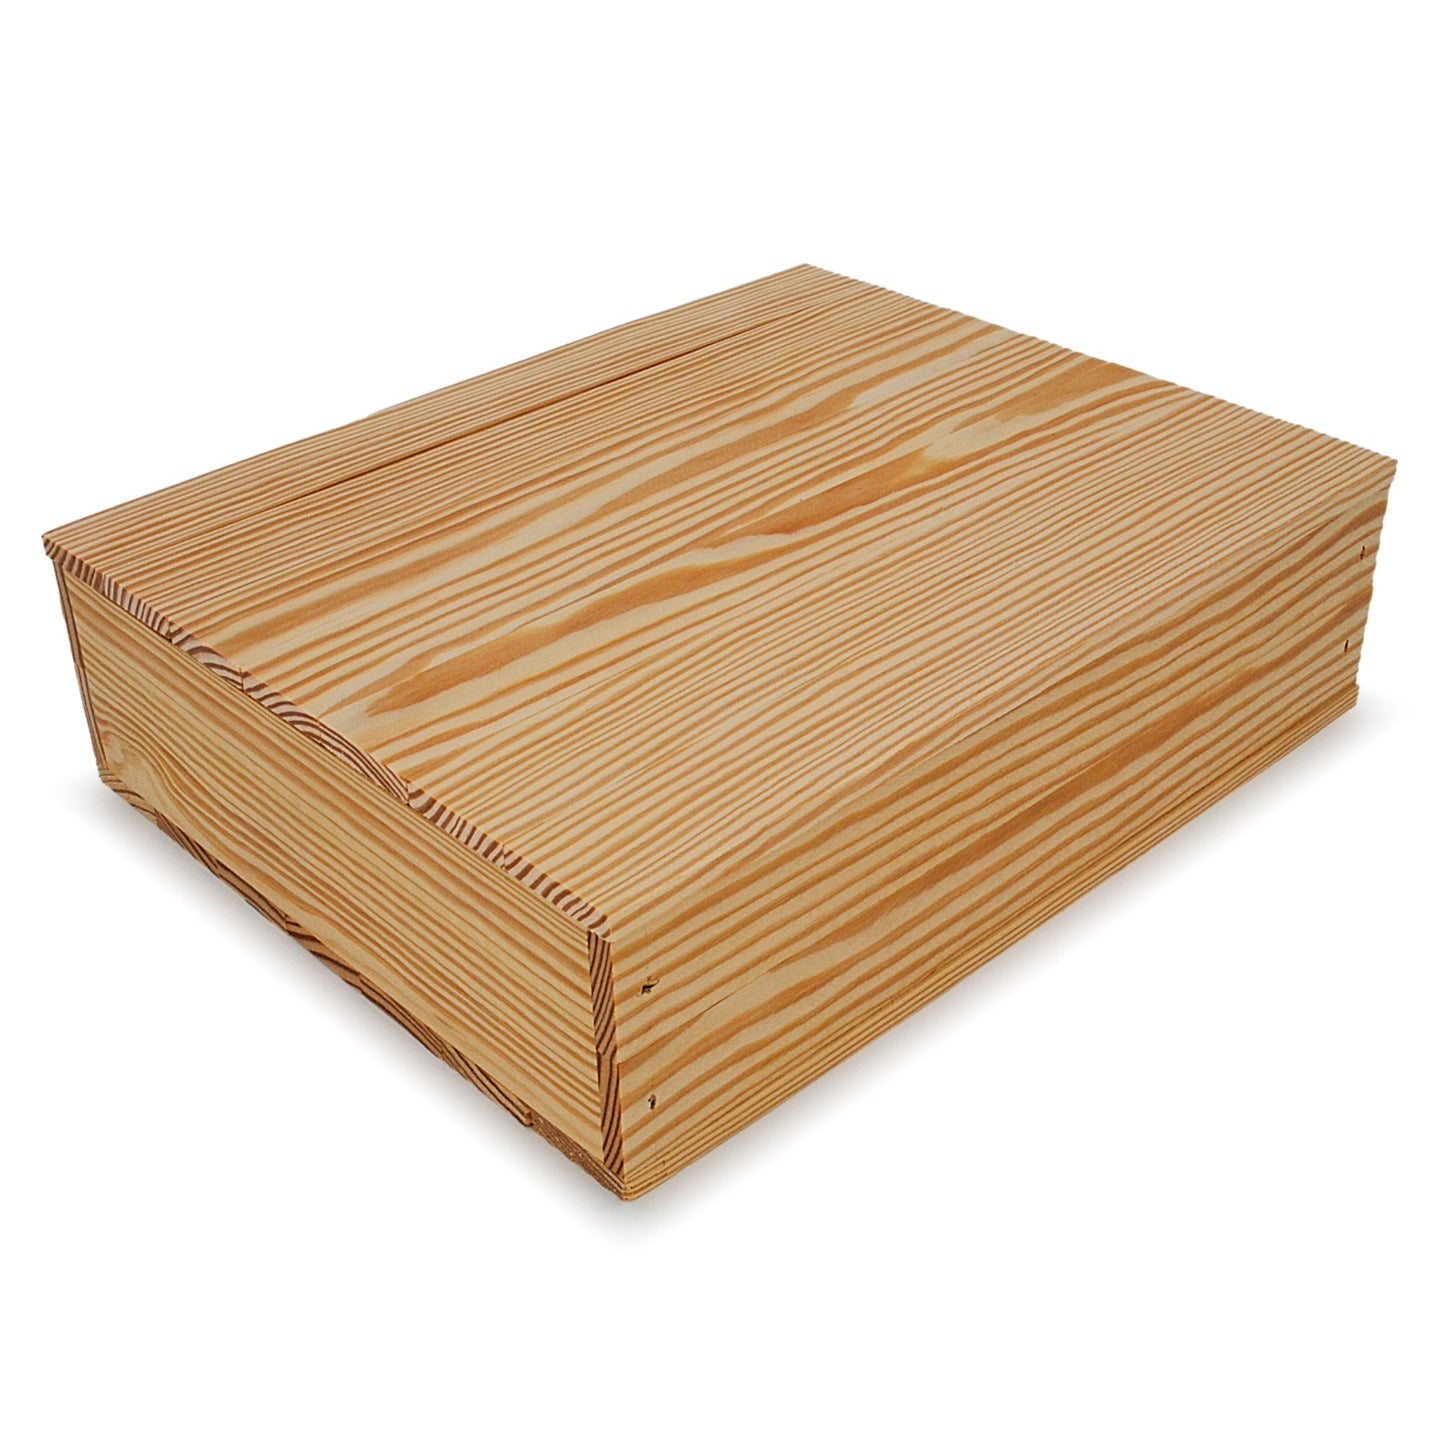 Small wooden crate with lid 14x11.5x3.5, 6-BX-14-11.5-3.5-NX-NW-LL, 12-BX-14-11.5-3.5-NX-NW-LL, 24-BX-14-11.5-3.5-NX-NW-LL, 48-BX-14-11.5-3.5-NX-NW-LL, 96-BX-14-11.5-3.5-NX-NW-LL